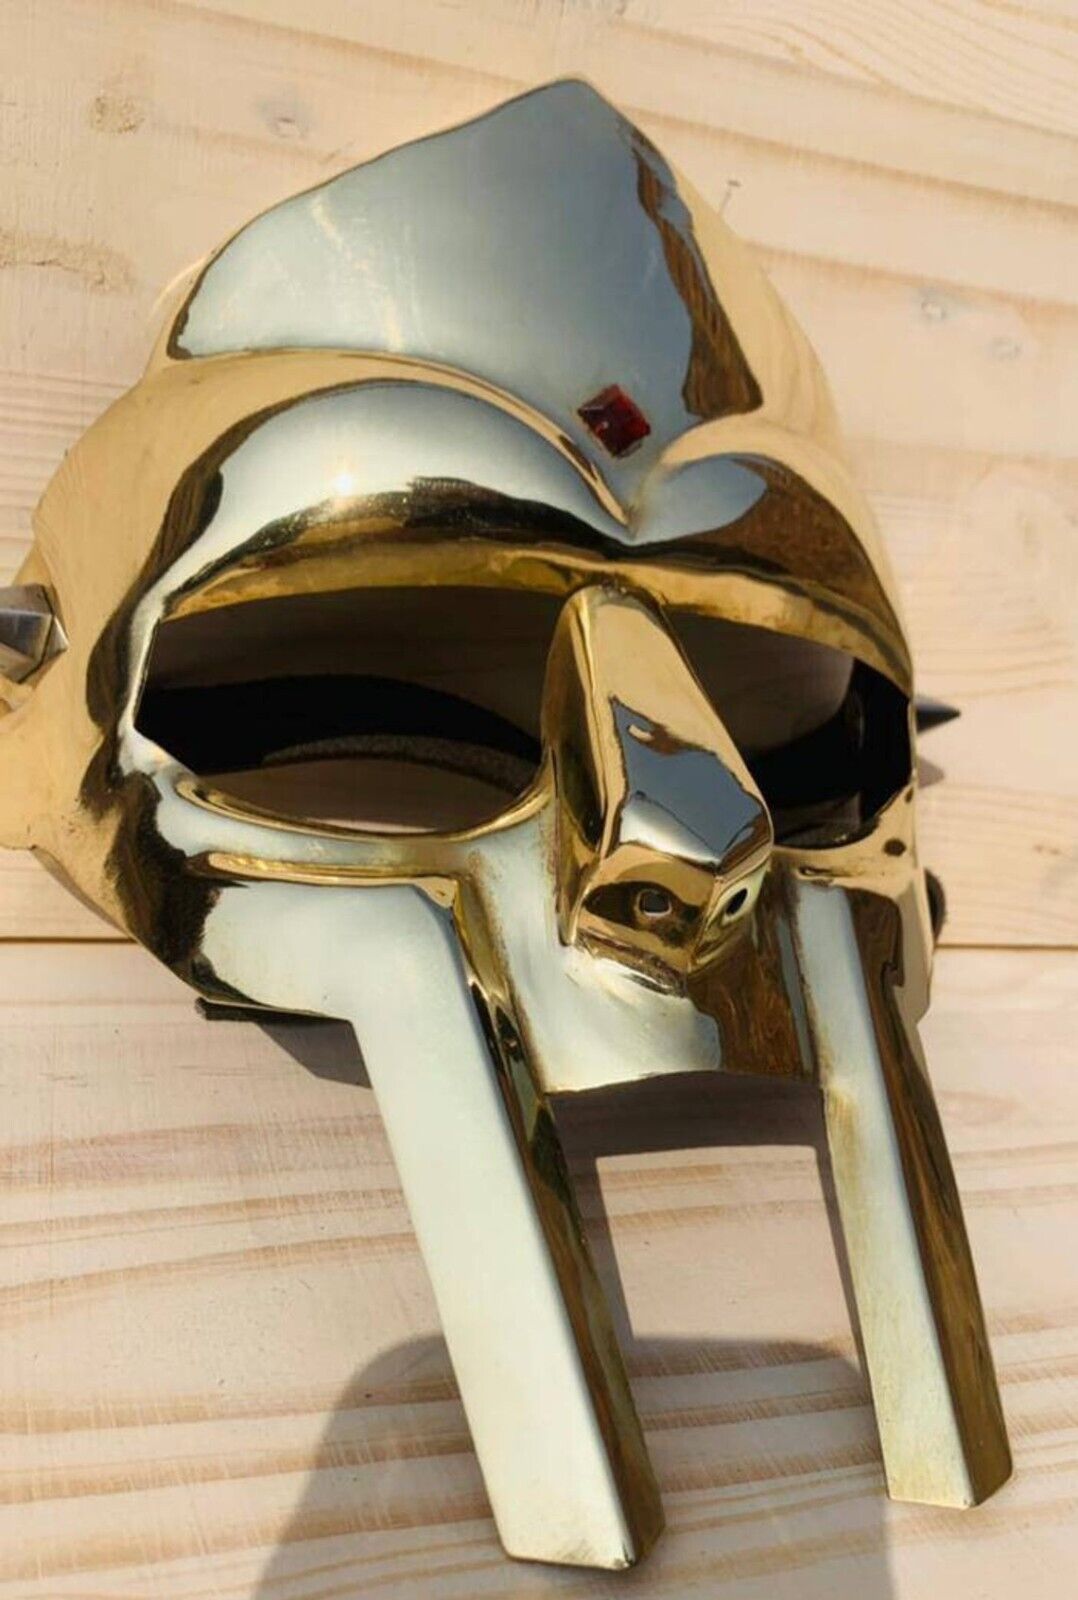 MF Doom Mask Mad-Villain Mask Cosplay Roleplay Halloween Party Mask